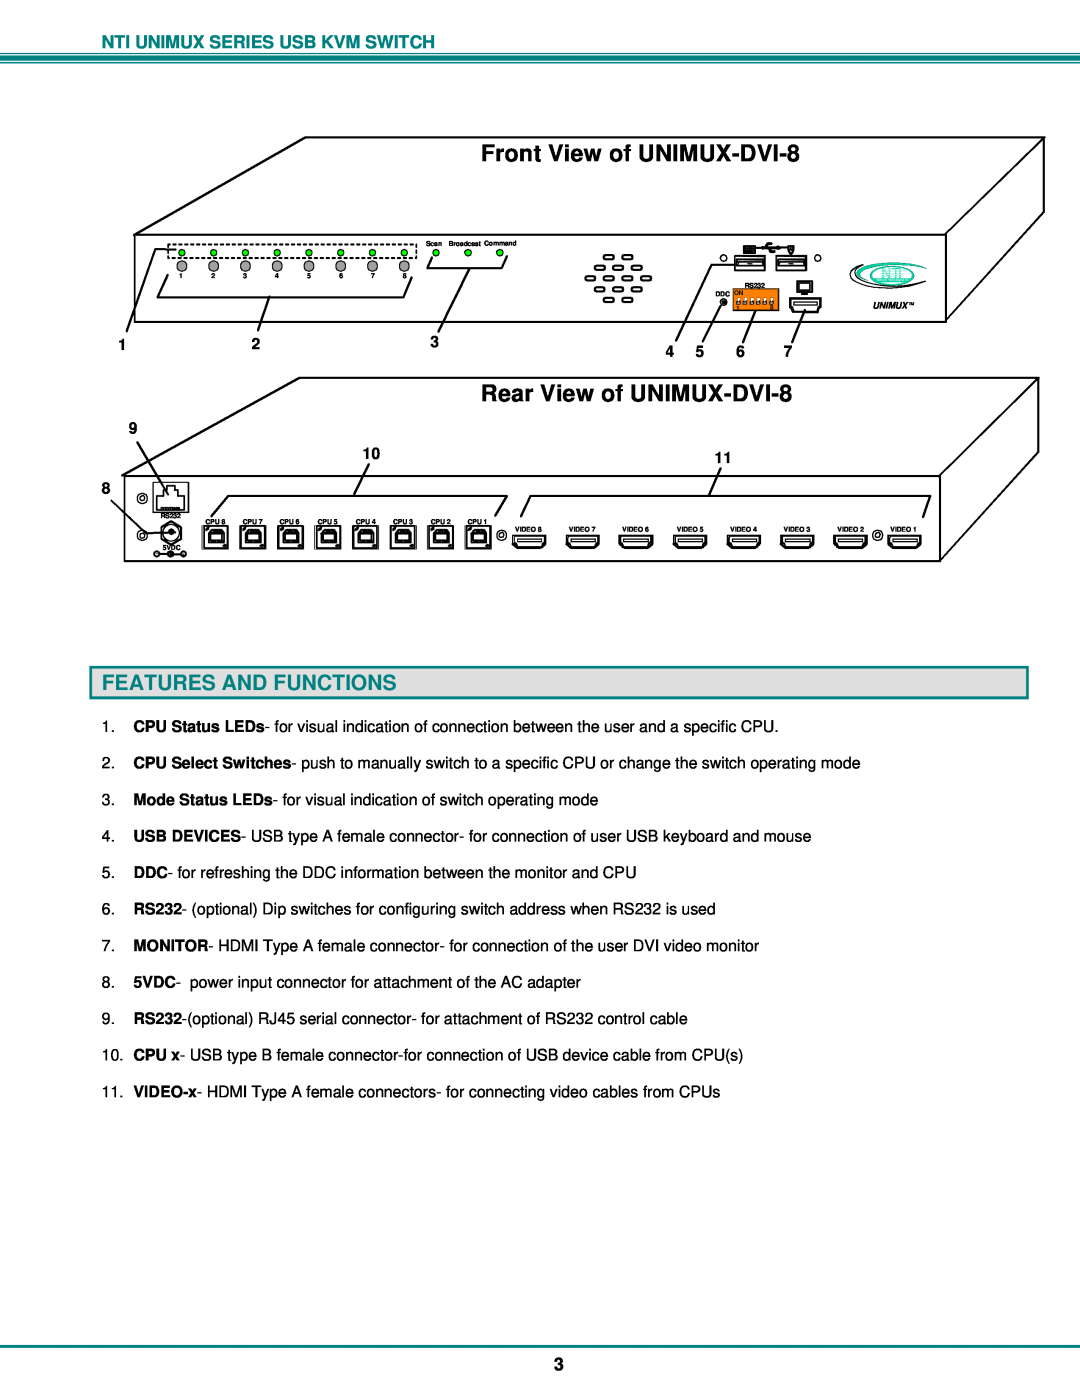 Network Technologies DVI-x operation manual Front View of UNIMUX-DVI-8, Rear View of UNIMUX-DVI-8, Features And Functions 